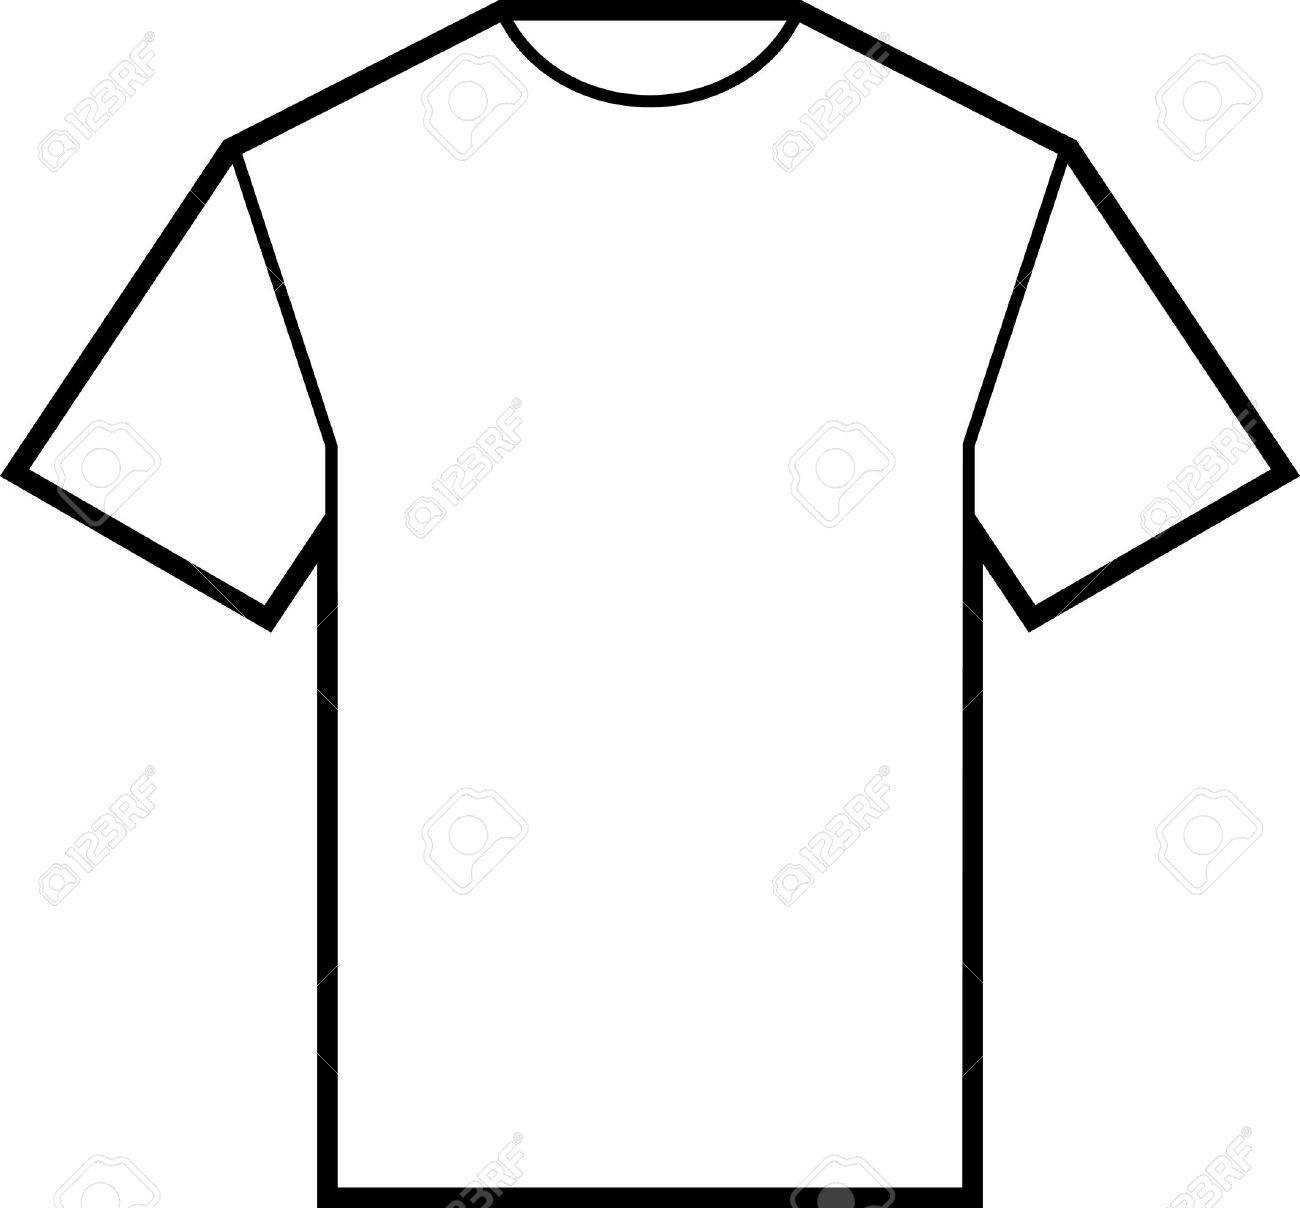 blank-white-t-shirt-template-vector-in-blank-t-shirt-outline-template